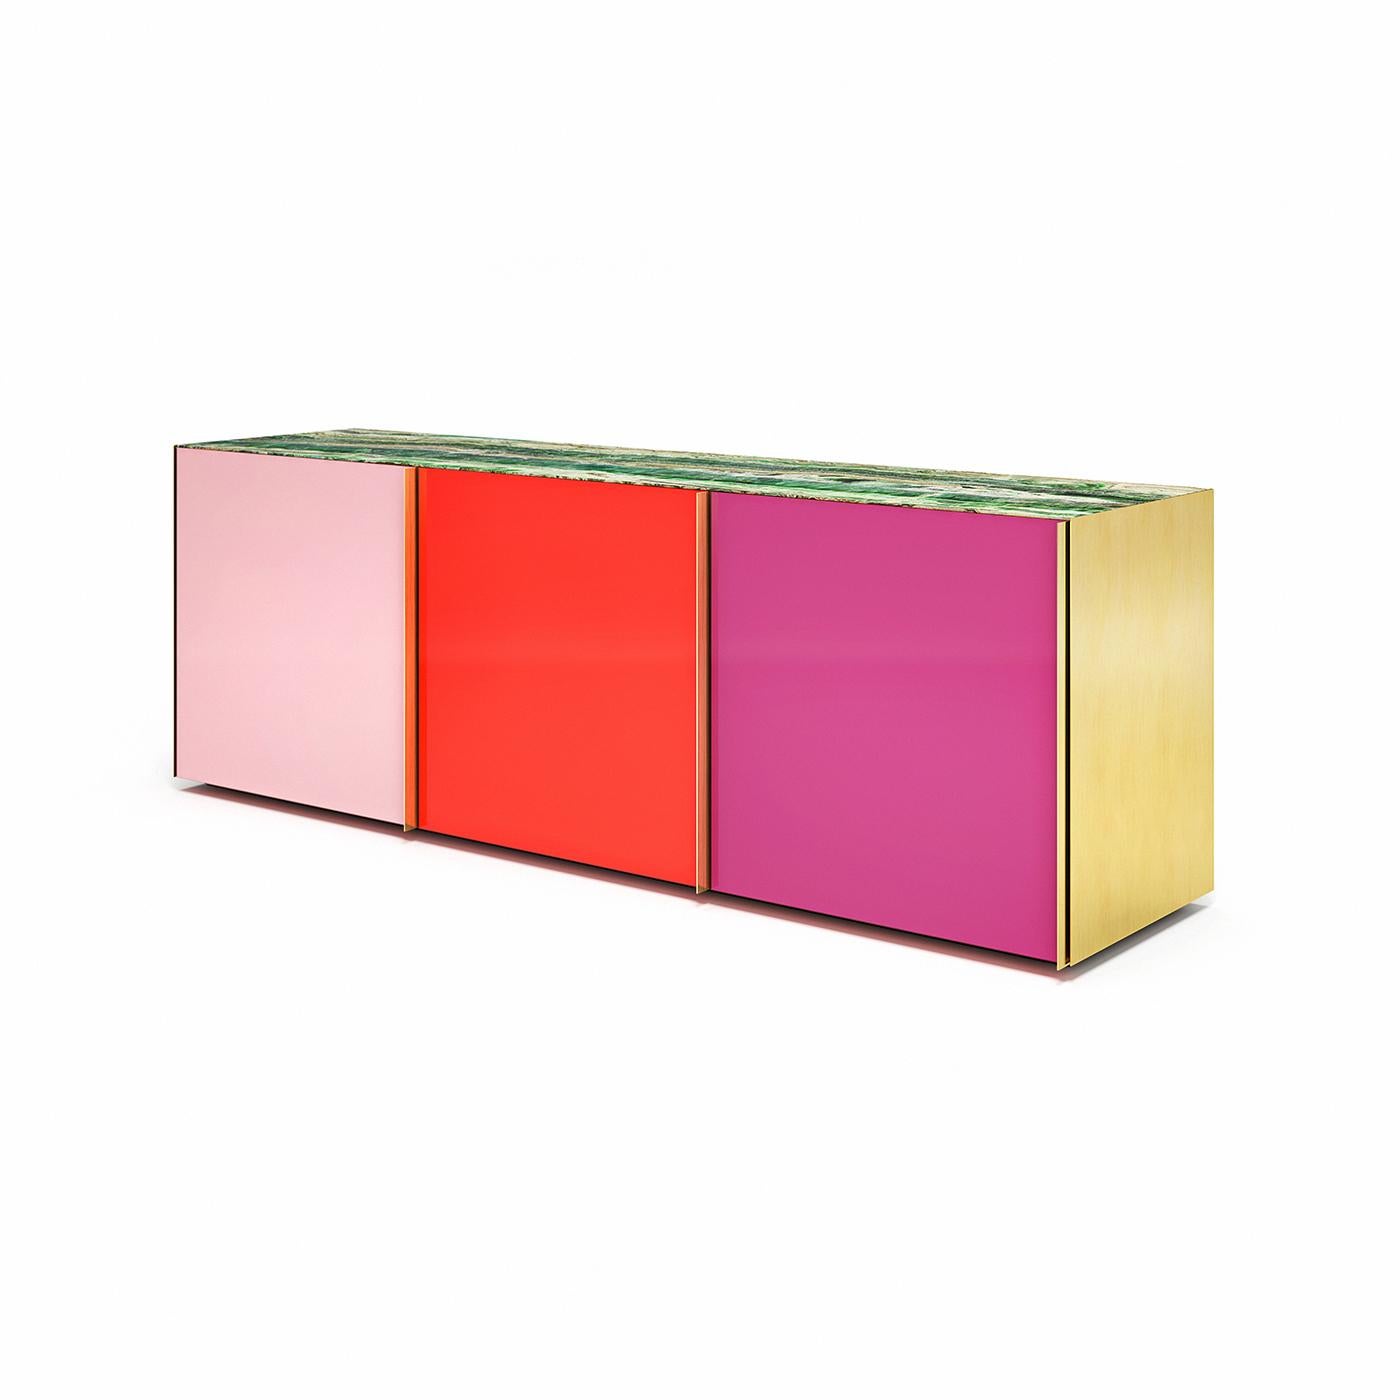 This eye-catching sideboard stands out for its vibrant colors and mesmerizing reflections. Its silhouette comprises a lacquered wooden structure equipped with three glass shelves, framed by side brass panels, and closed on the front by three glass